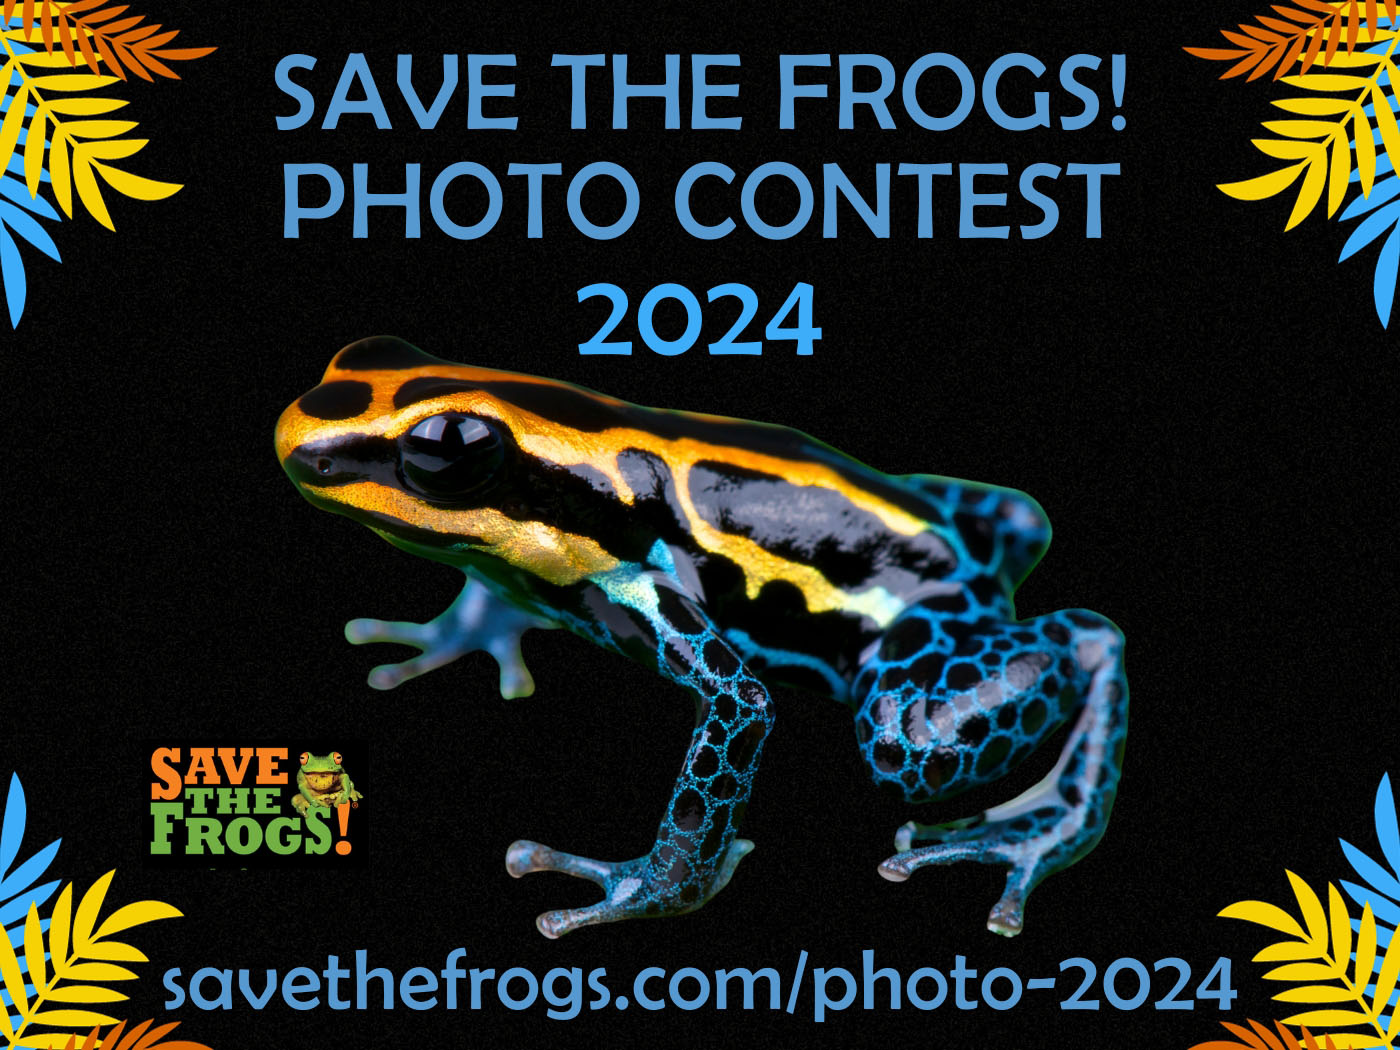 SAVE THE FROGS! Concours photo Gagnants 2024